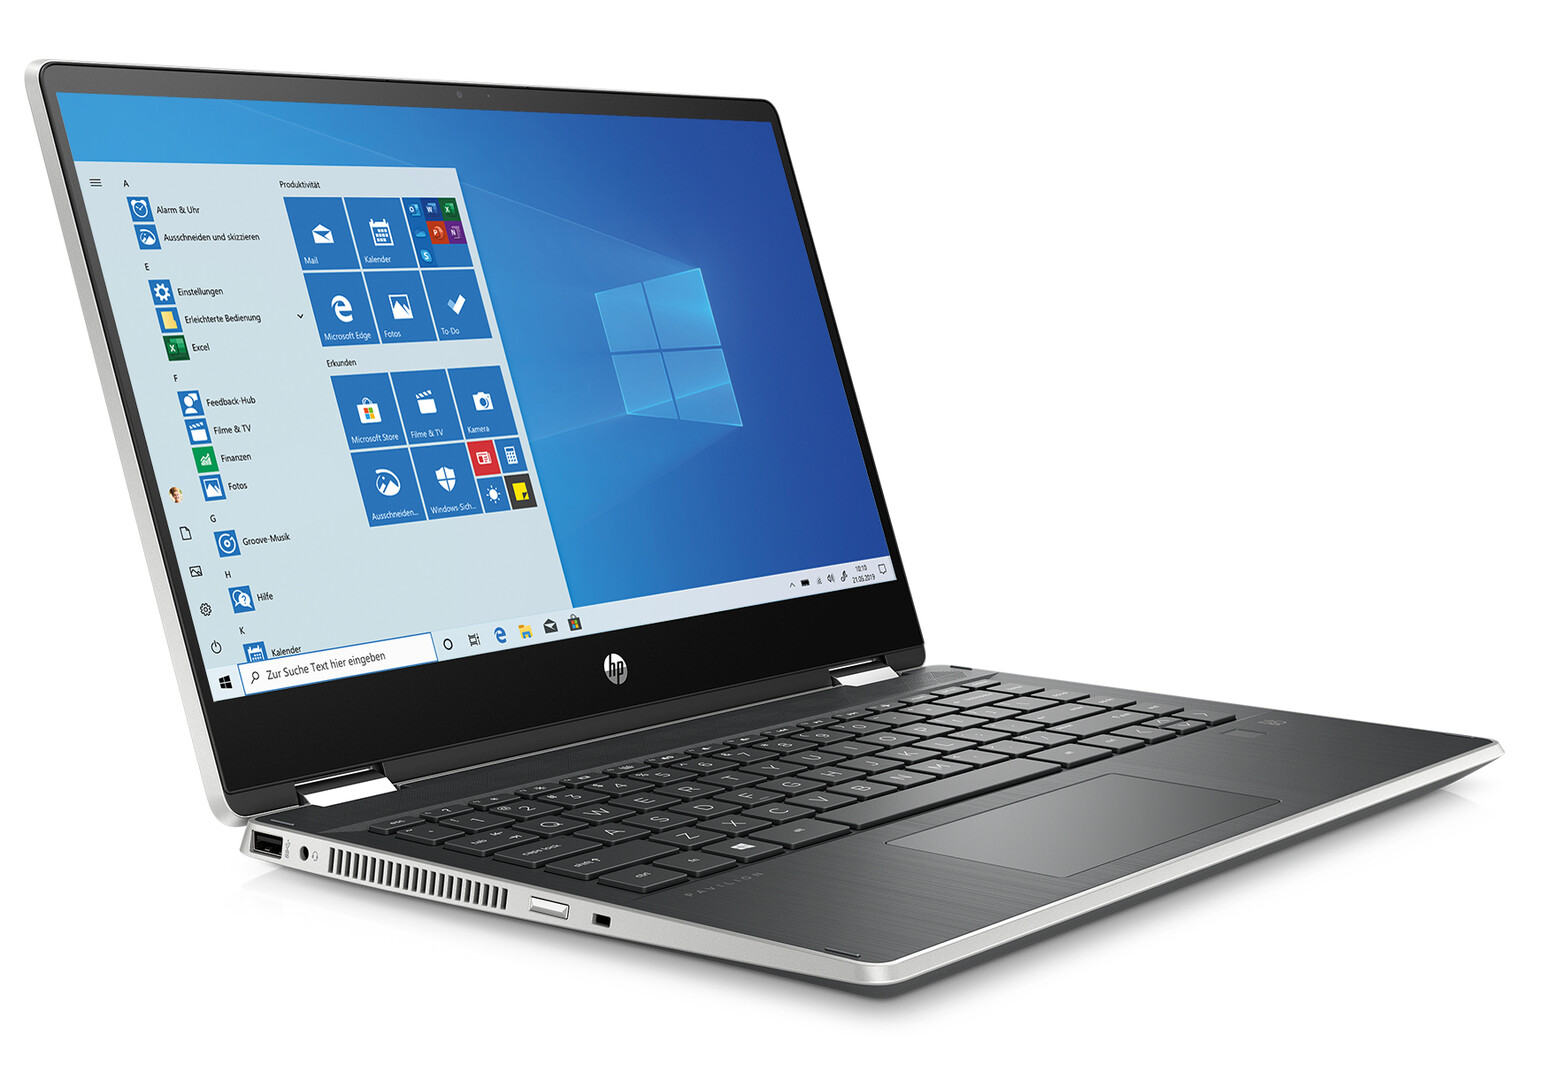 HP Pavilion x360 14 Review: 14-inch convertible with optional pen input